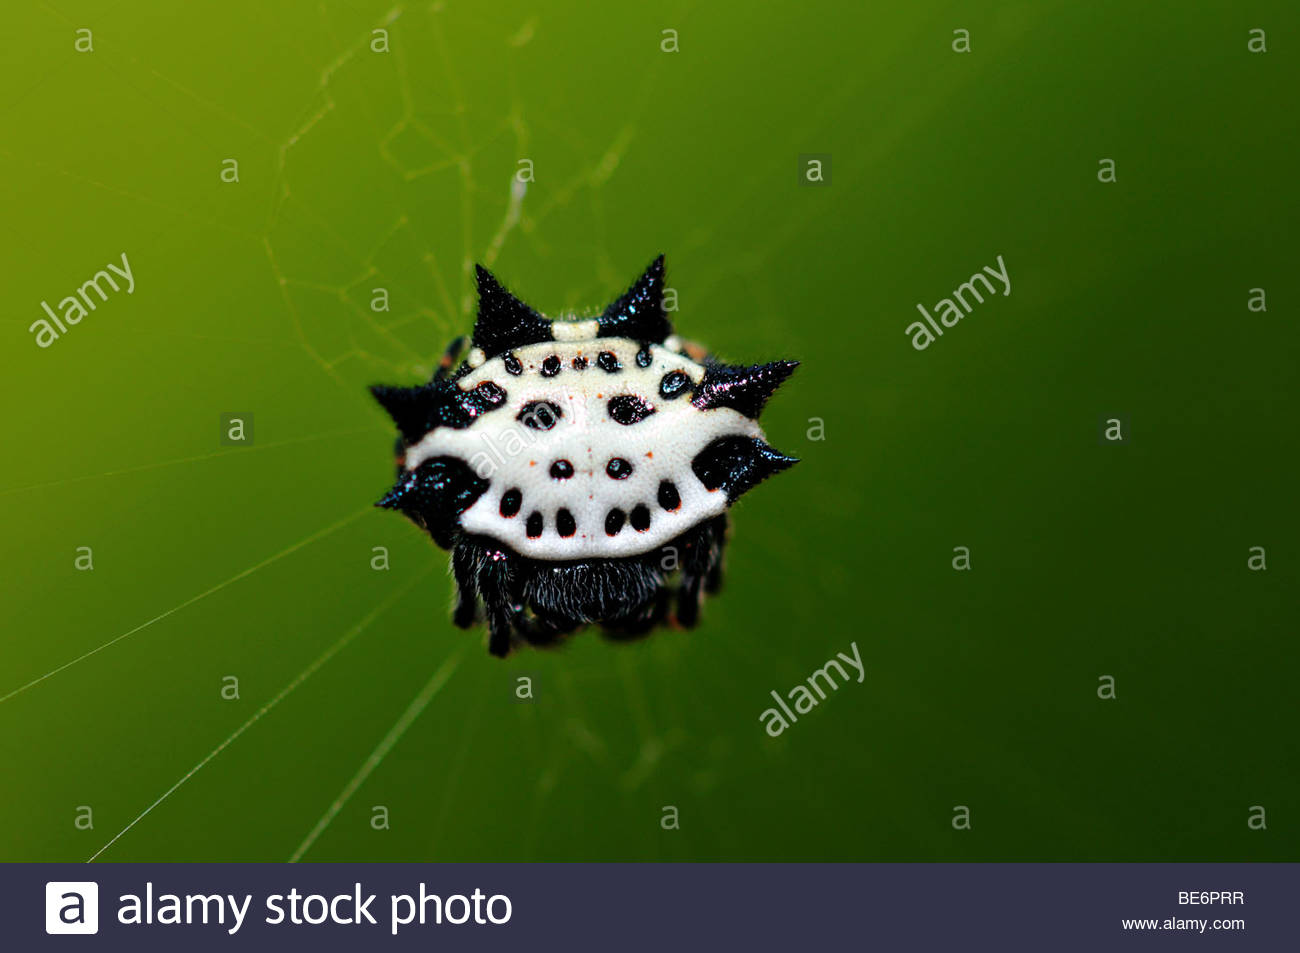 Spiny Orb Weaver svg #8, Download drawings